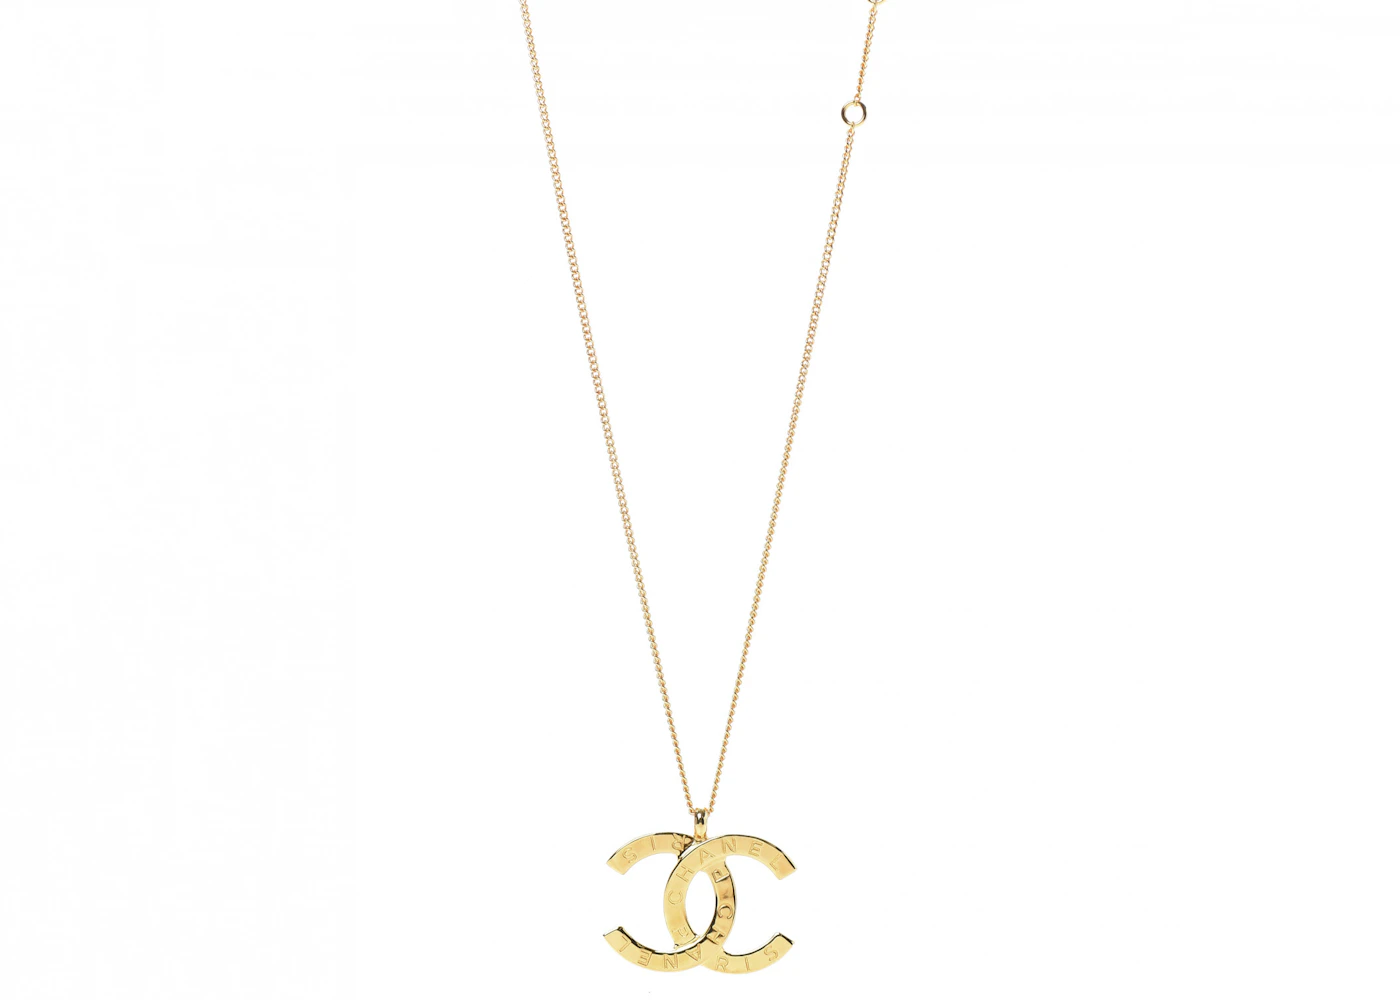 Chanel Metal CC Paris Button Necklace Gold in Gold Metal with Gold-tone - US